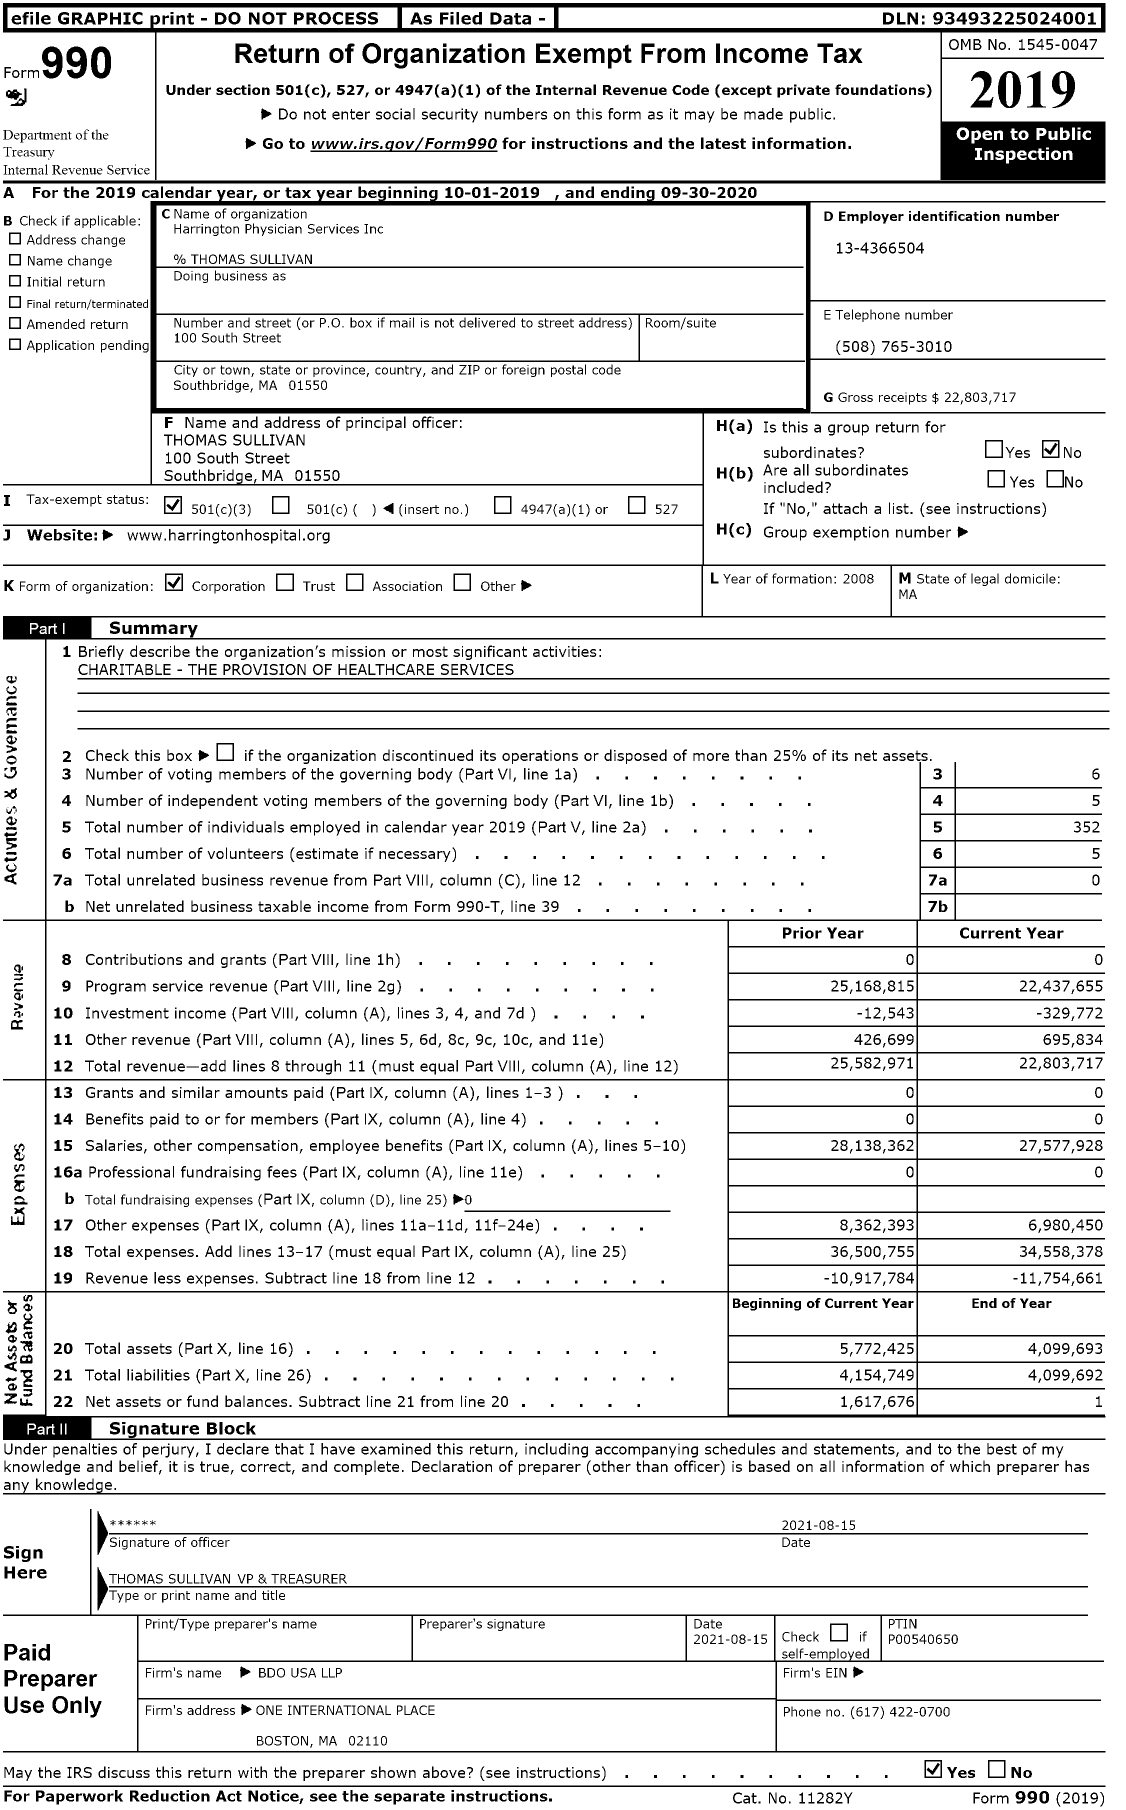 Image of first page of 2019 Form 990 for Harrington Physician Services (HPS)